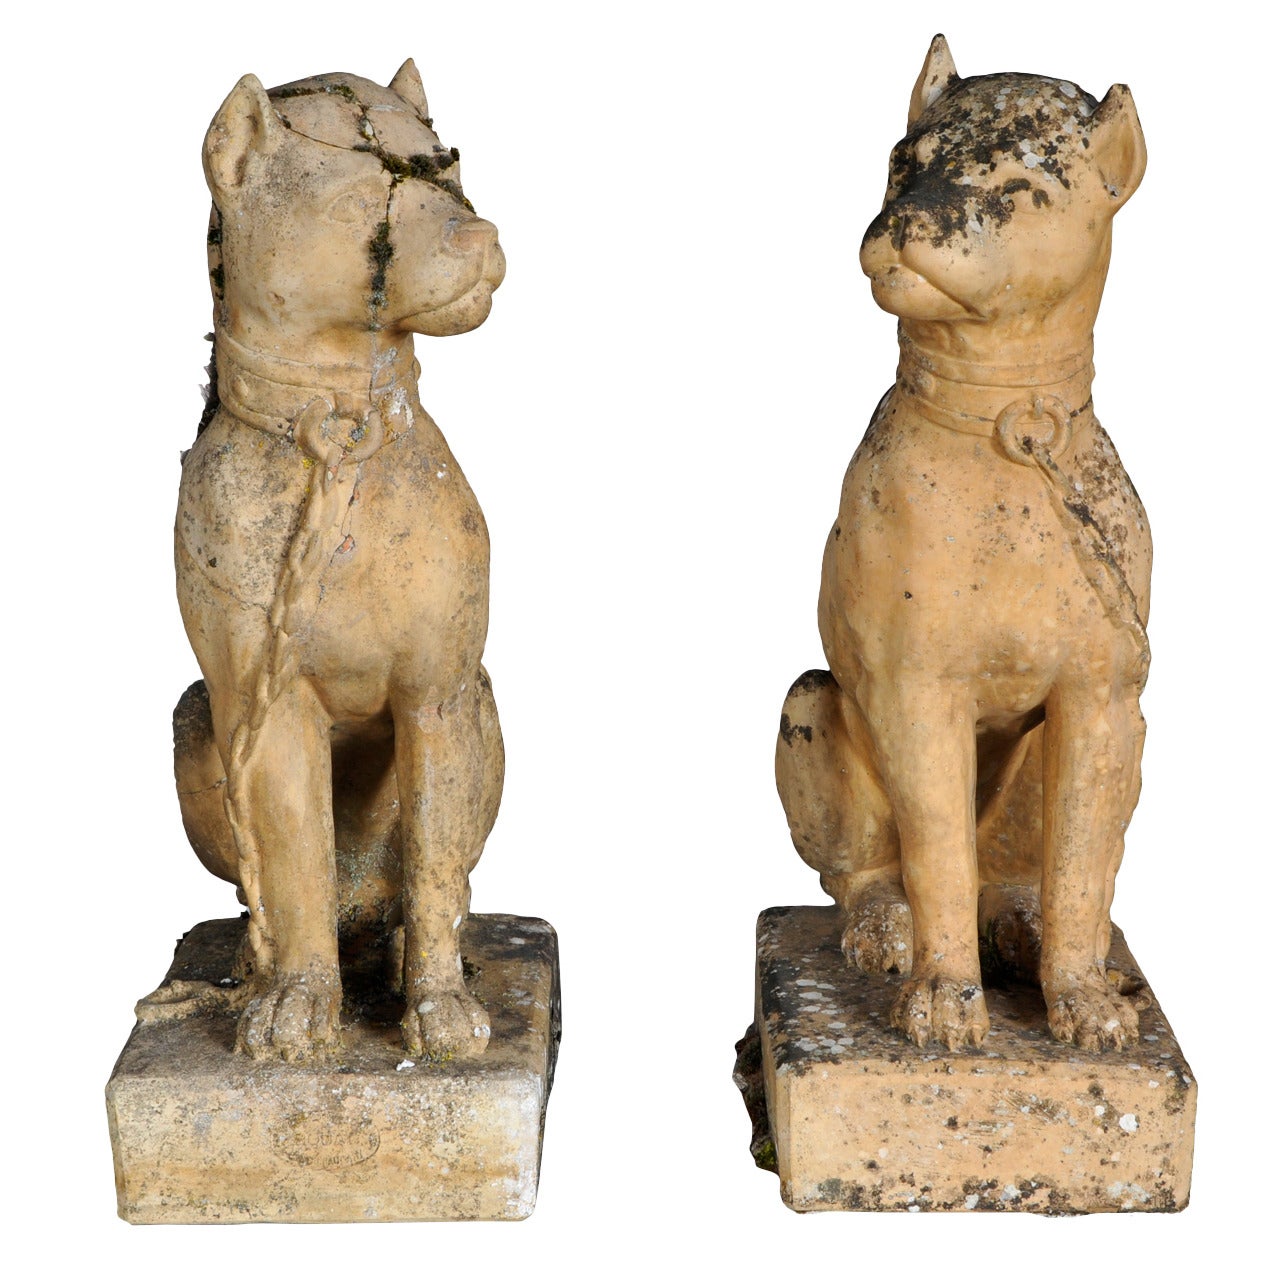 Pair of Terracotta Bulldogs by Bouat Manufacturer in Castelnaudary, circa 1900